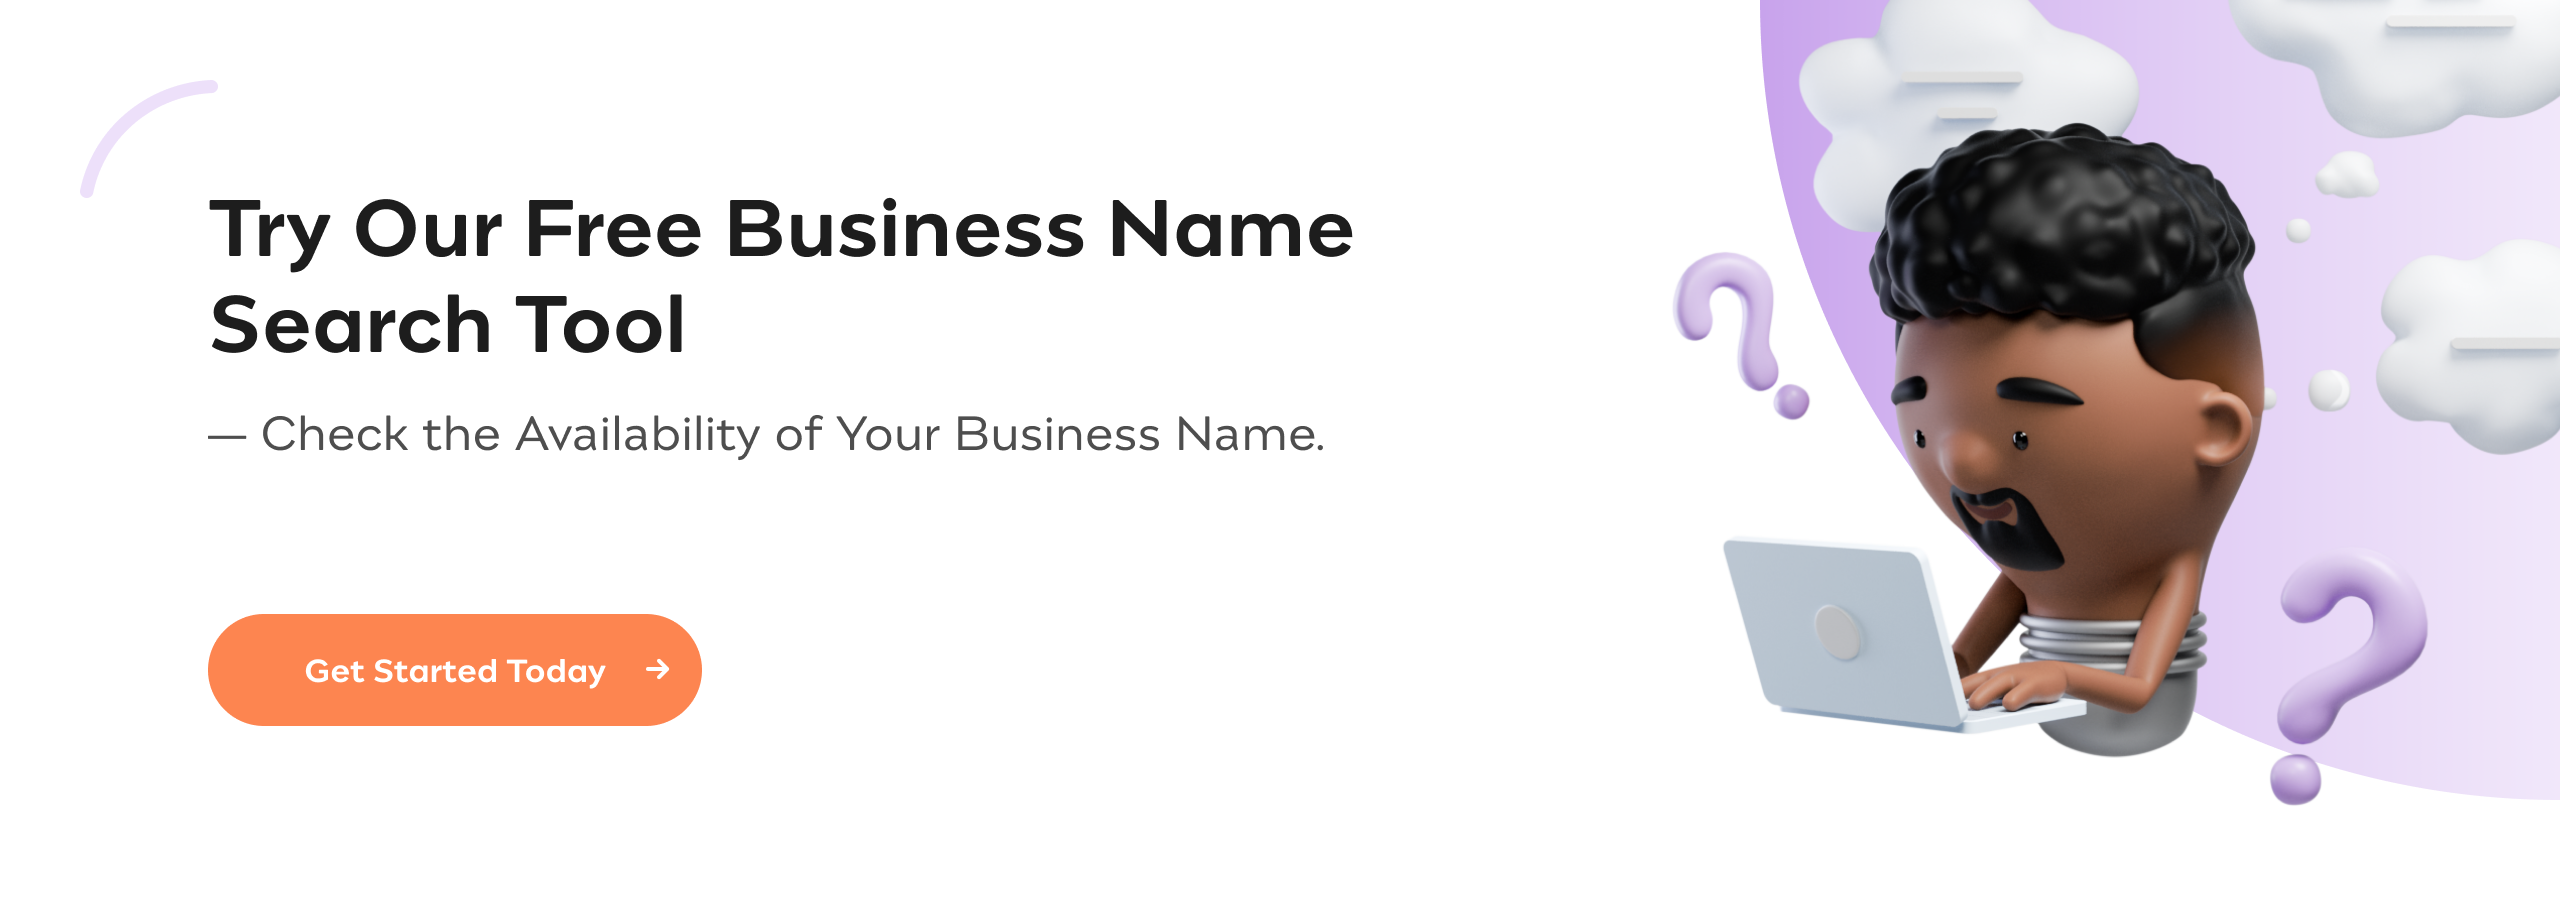 Try Our Free Business Name Search Tool. Check the Availability of Your Business Name.